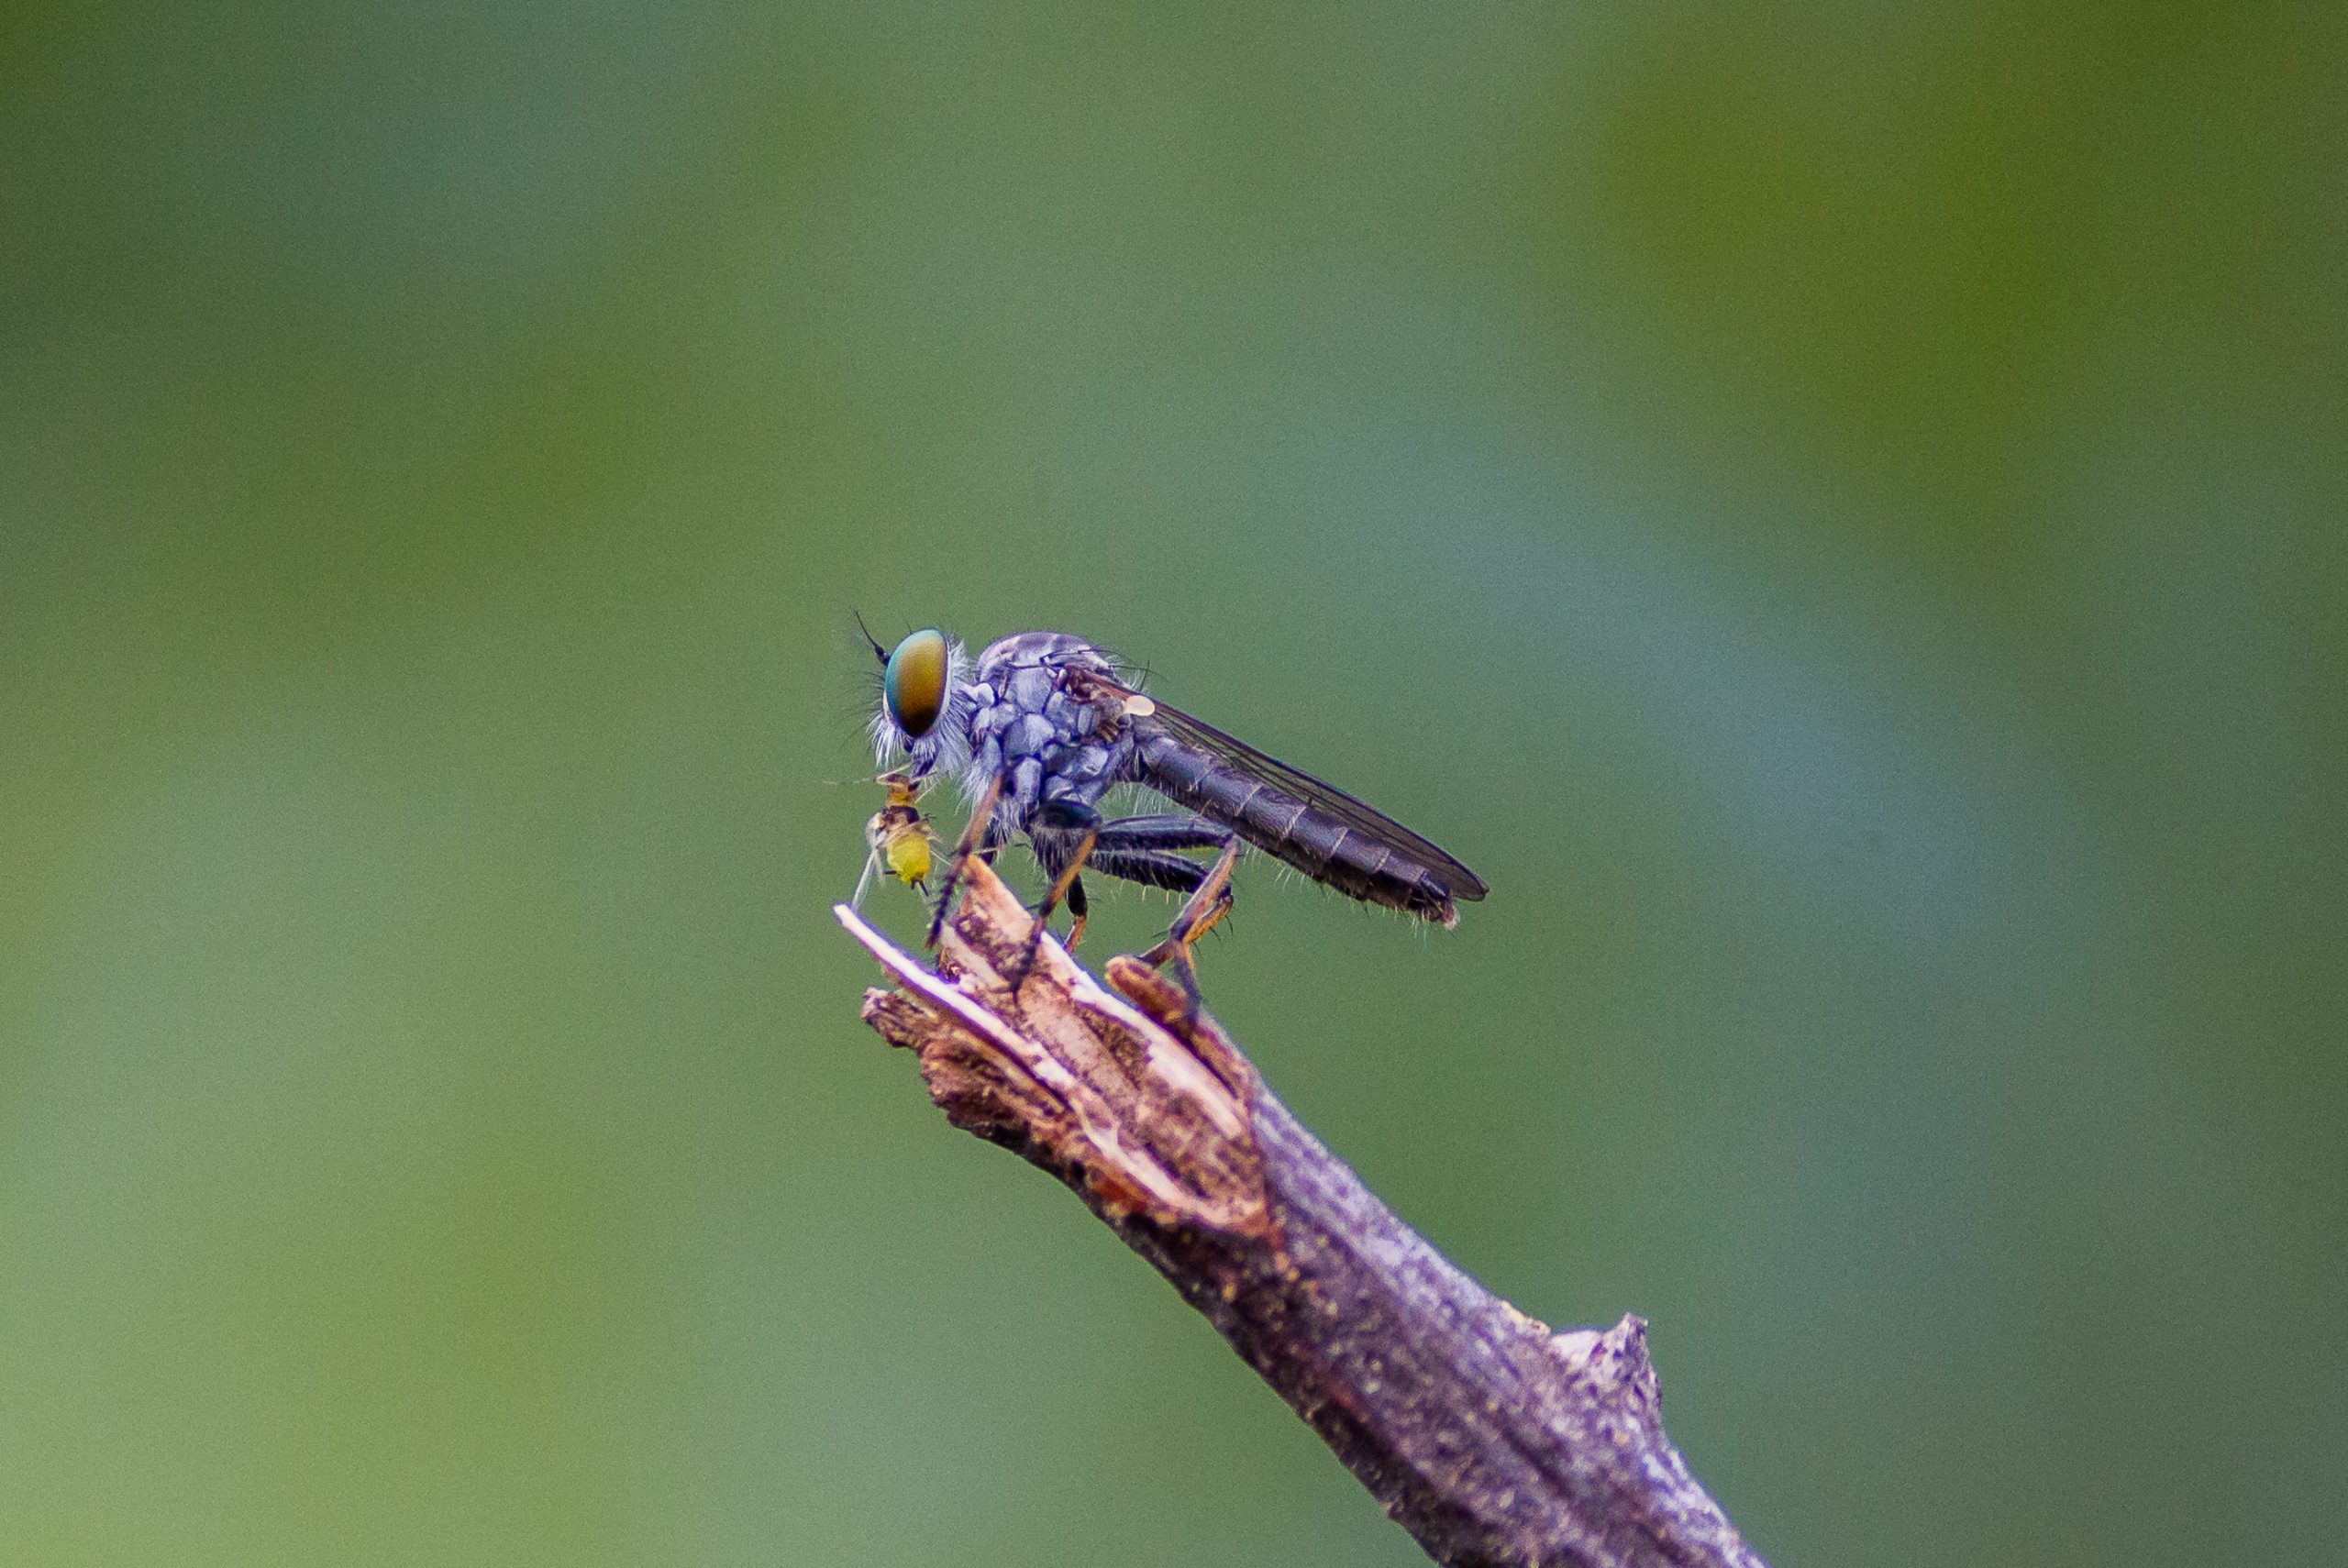 A robber fly with its kill